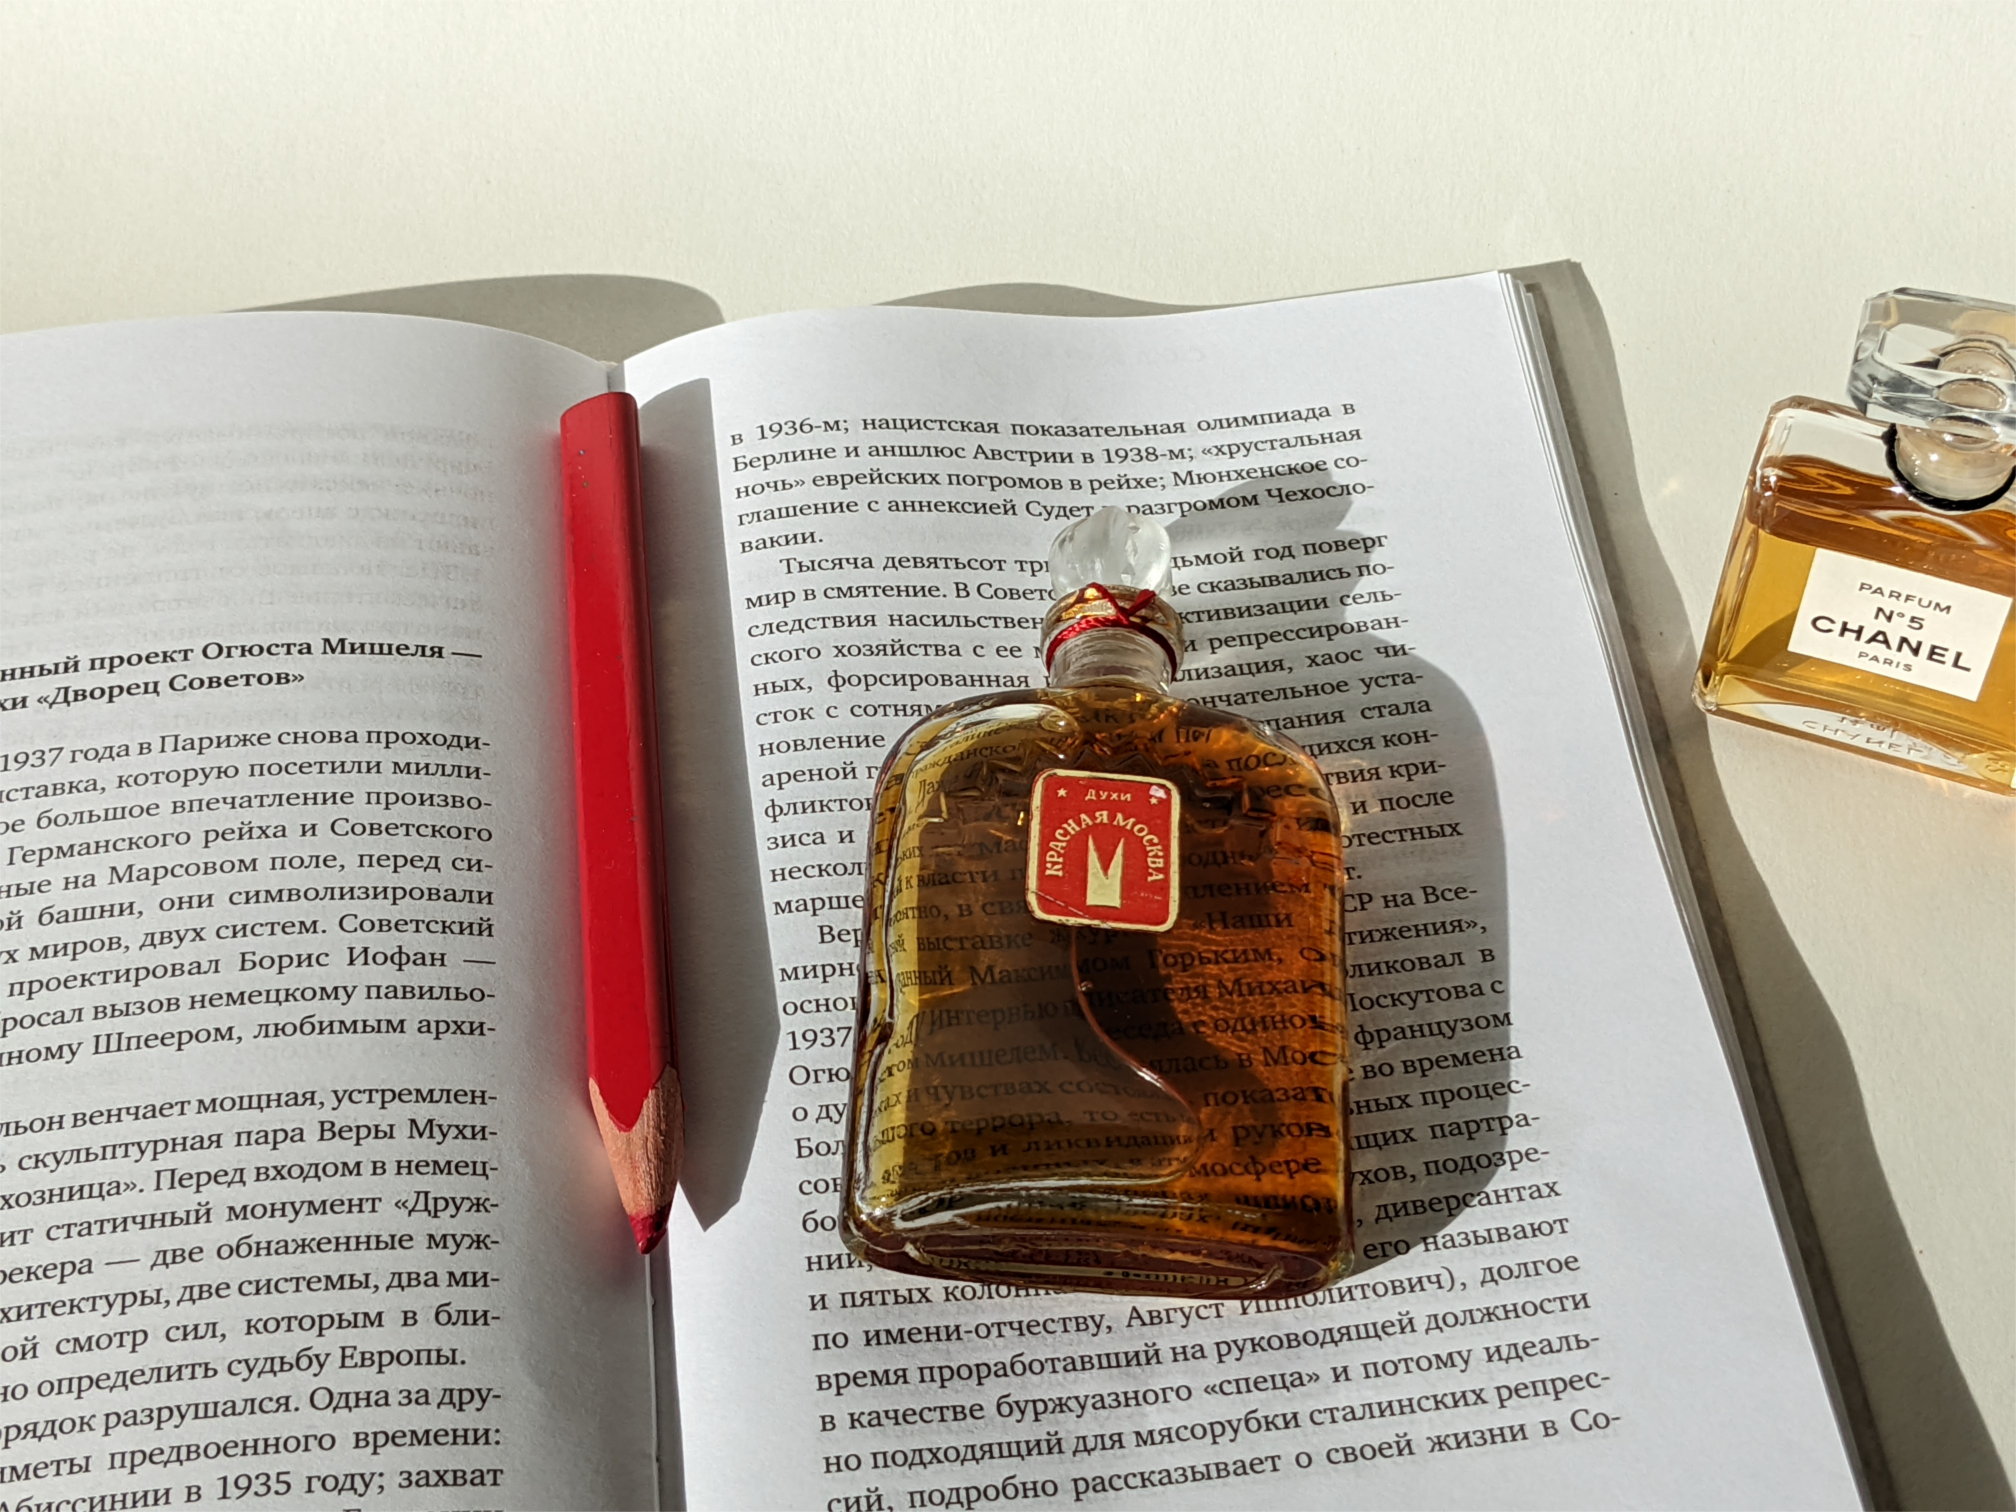 The Scent of Empire: Chanel No. 5 and Red Moscow Book by Karl Schlögel ~  Art Books Events